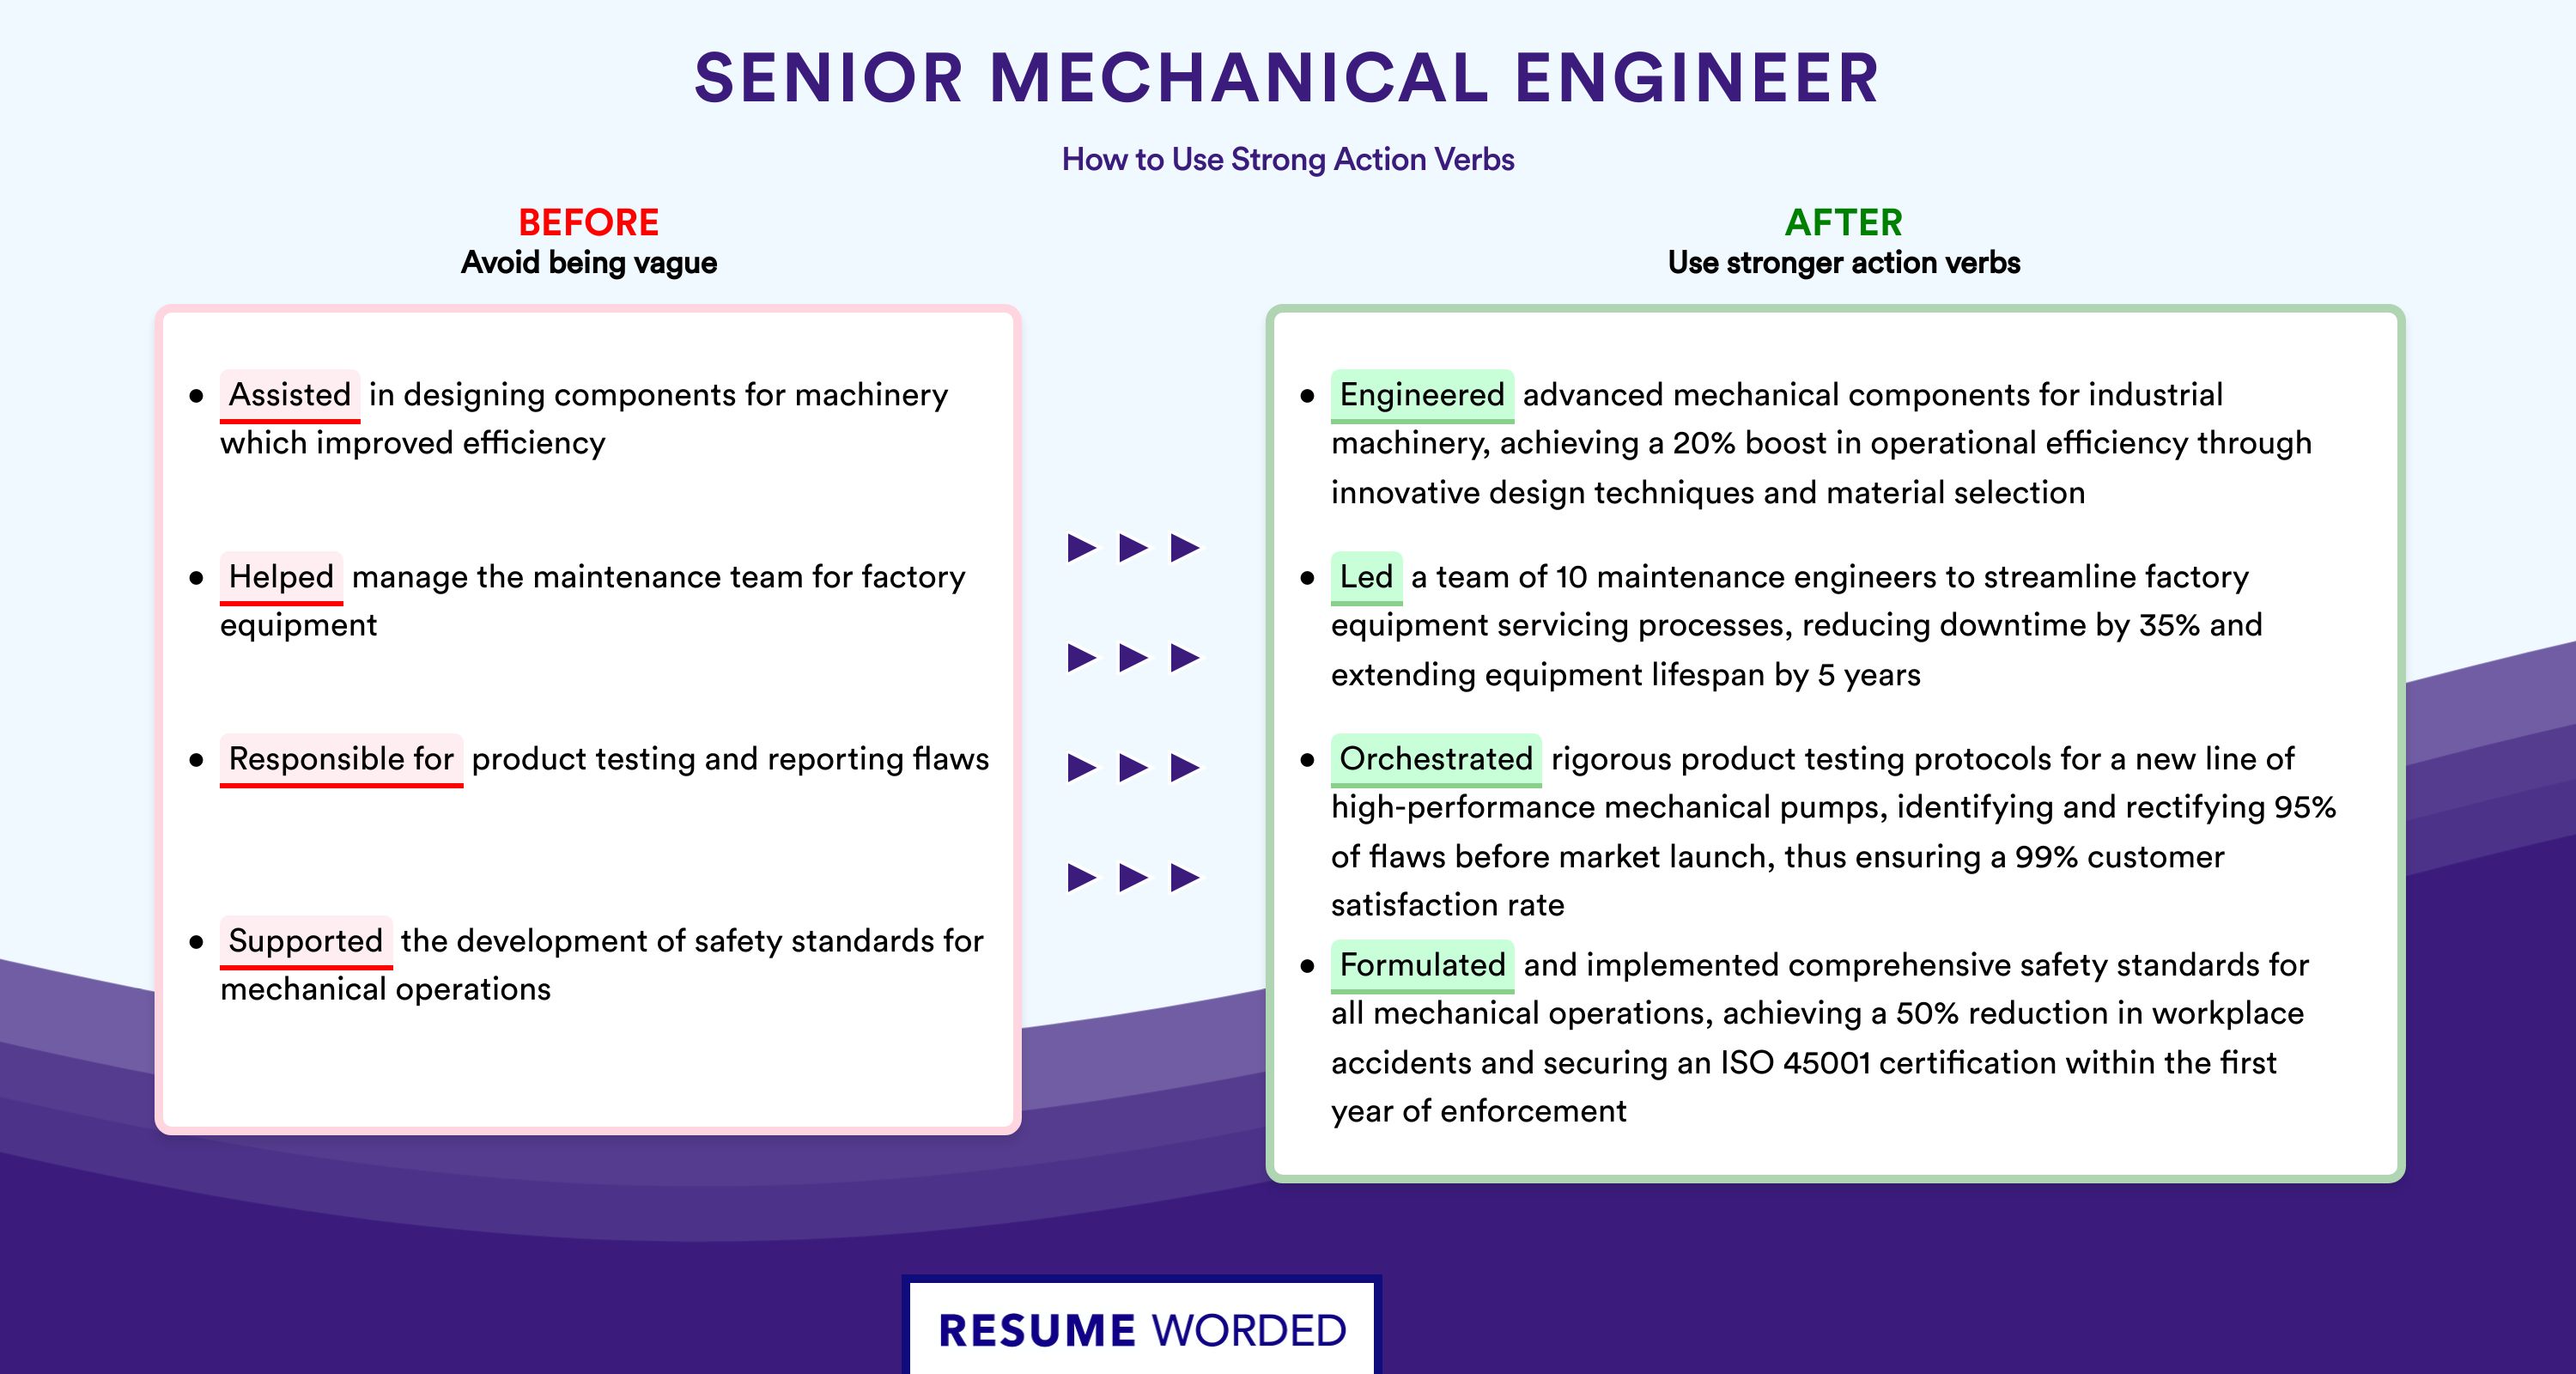 Action Verbs for Senior Mechanical Engineer